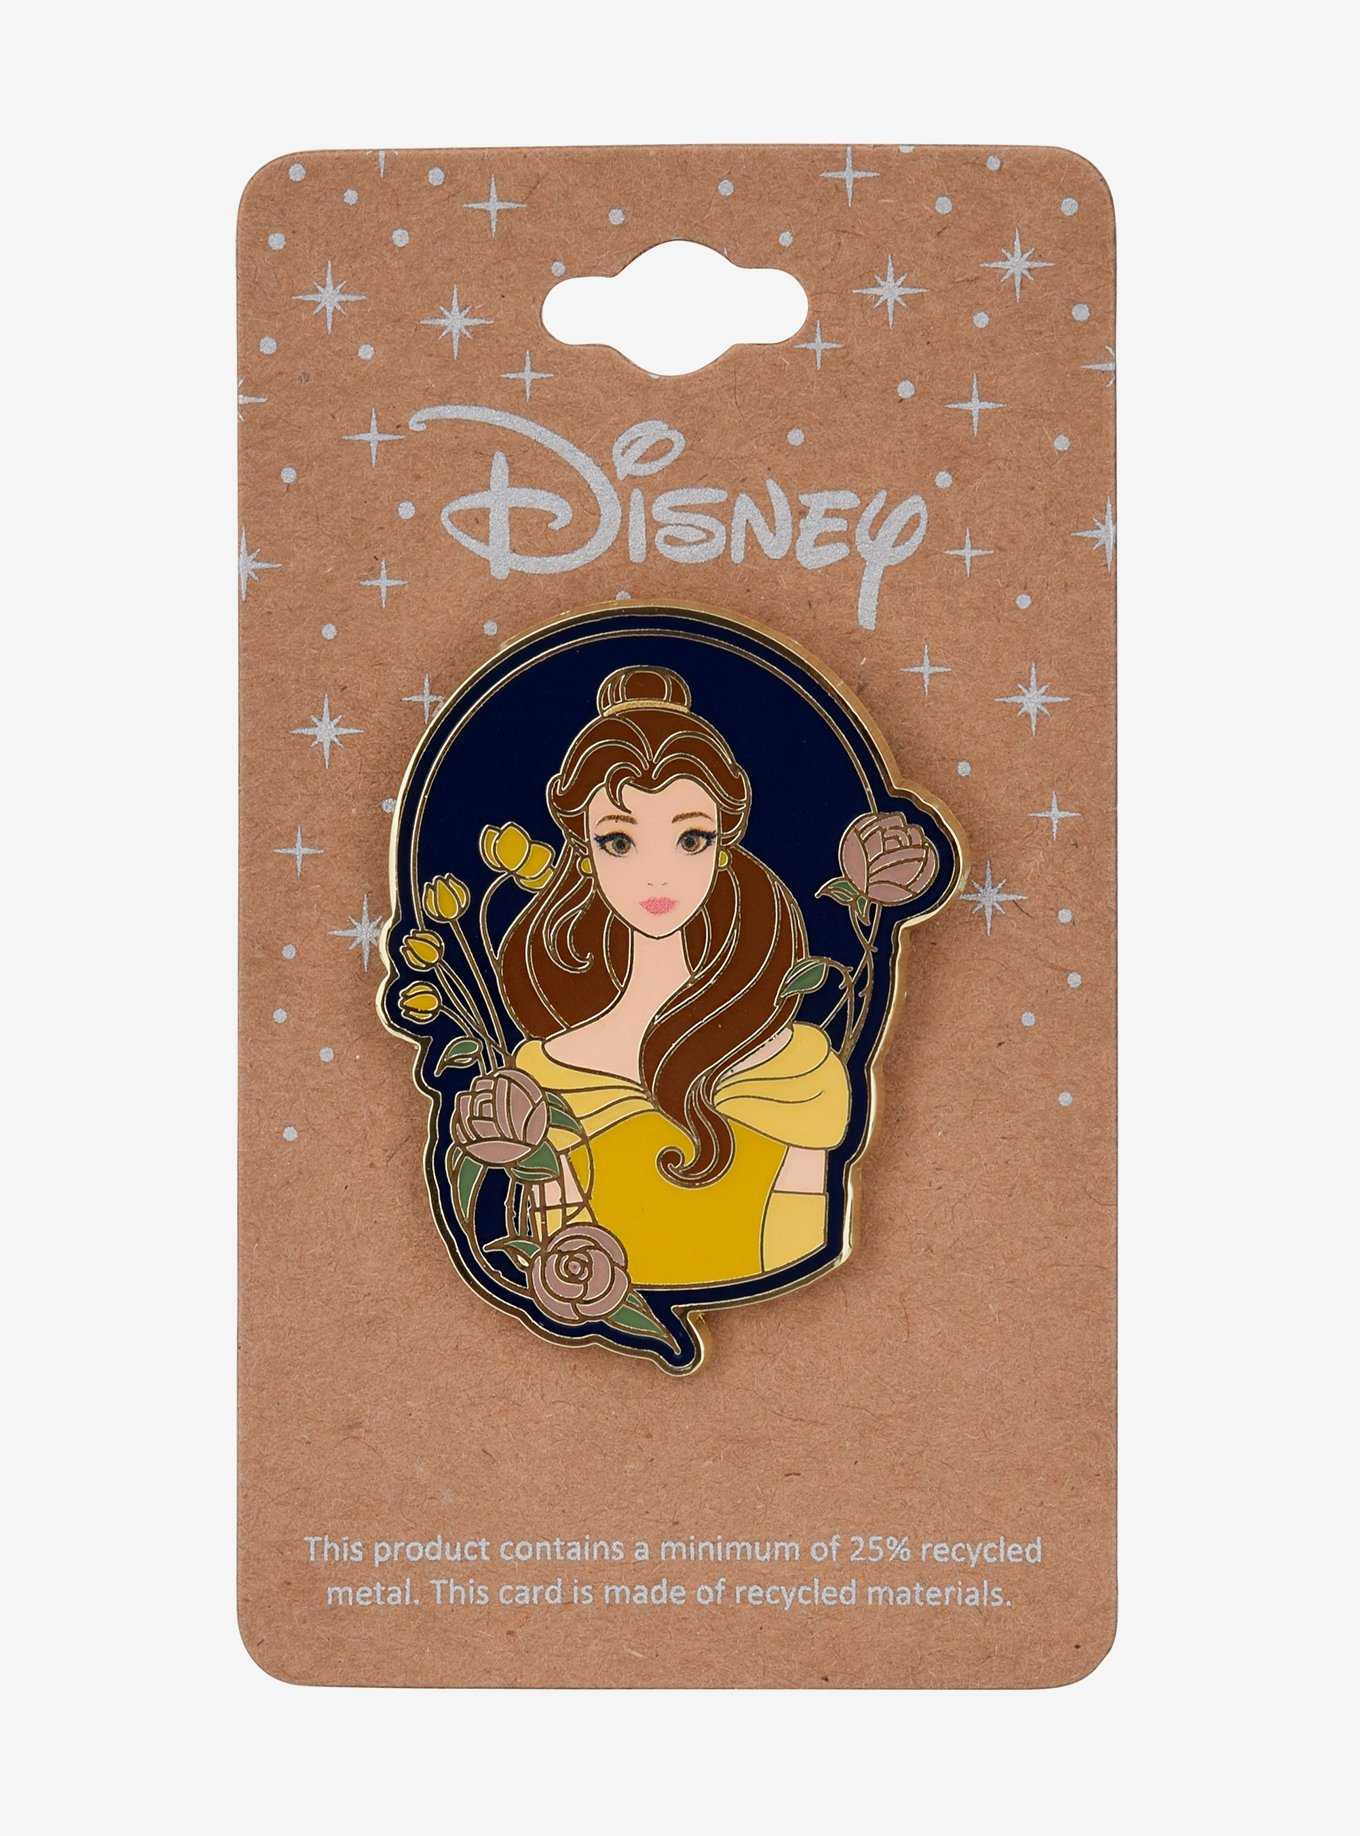 Disney Beauty and the Beast Belle Floral Portrait Enamel Pin - BoxLunch Exclusive, , hi-res